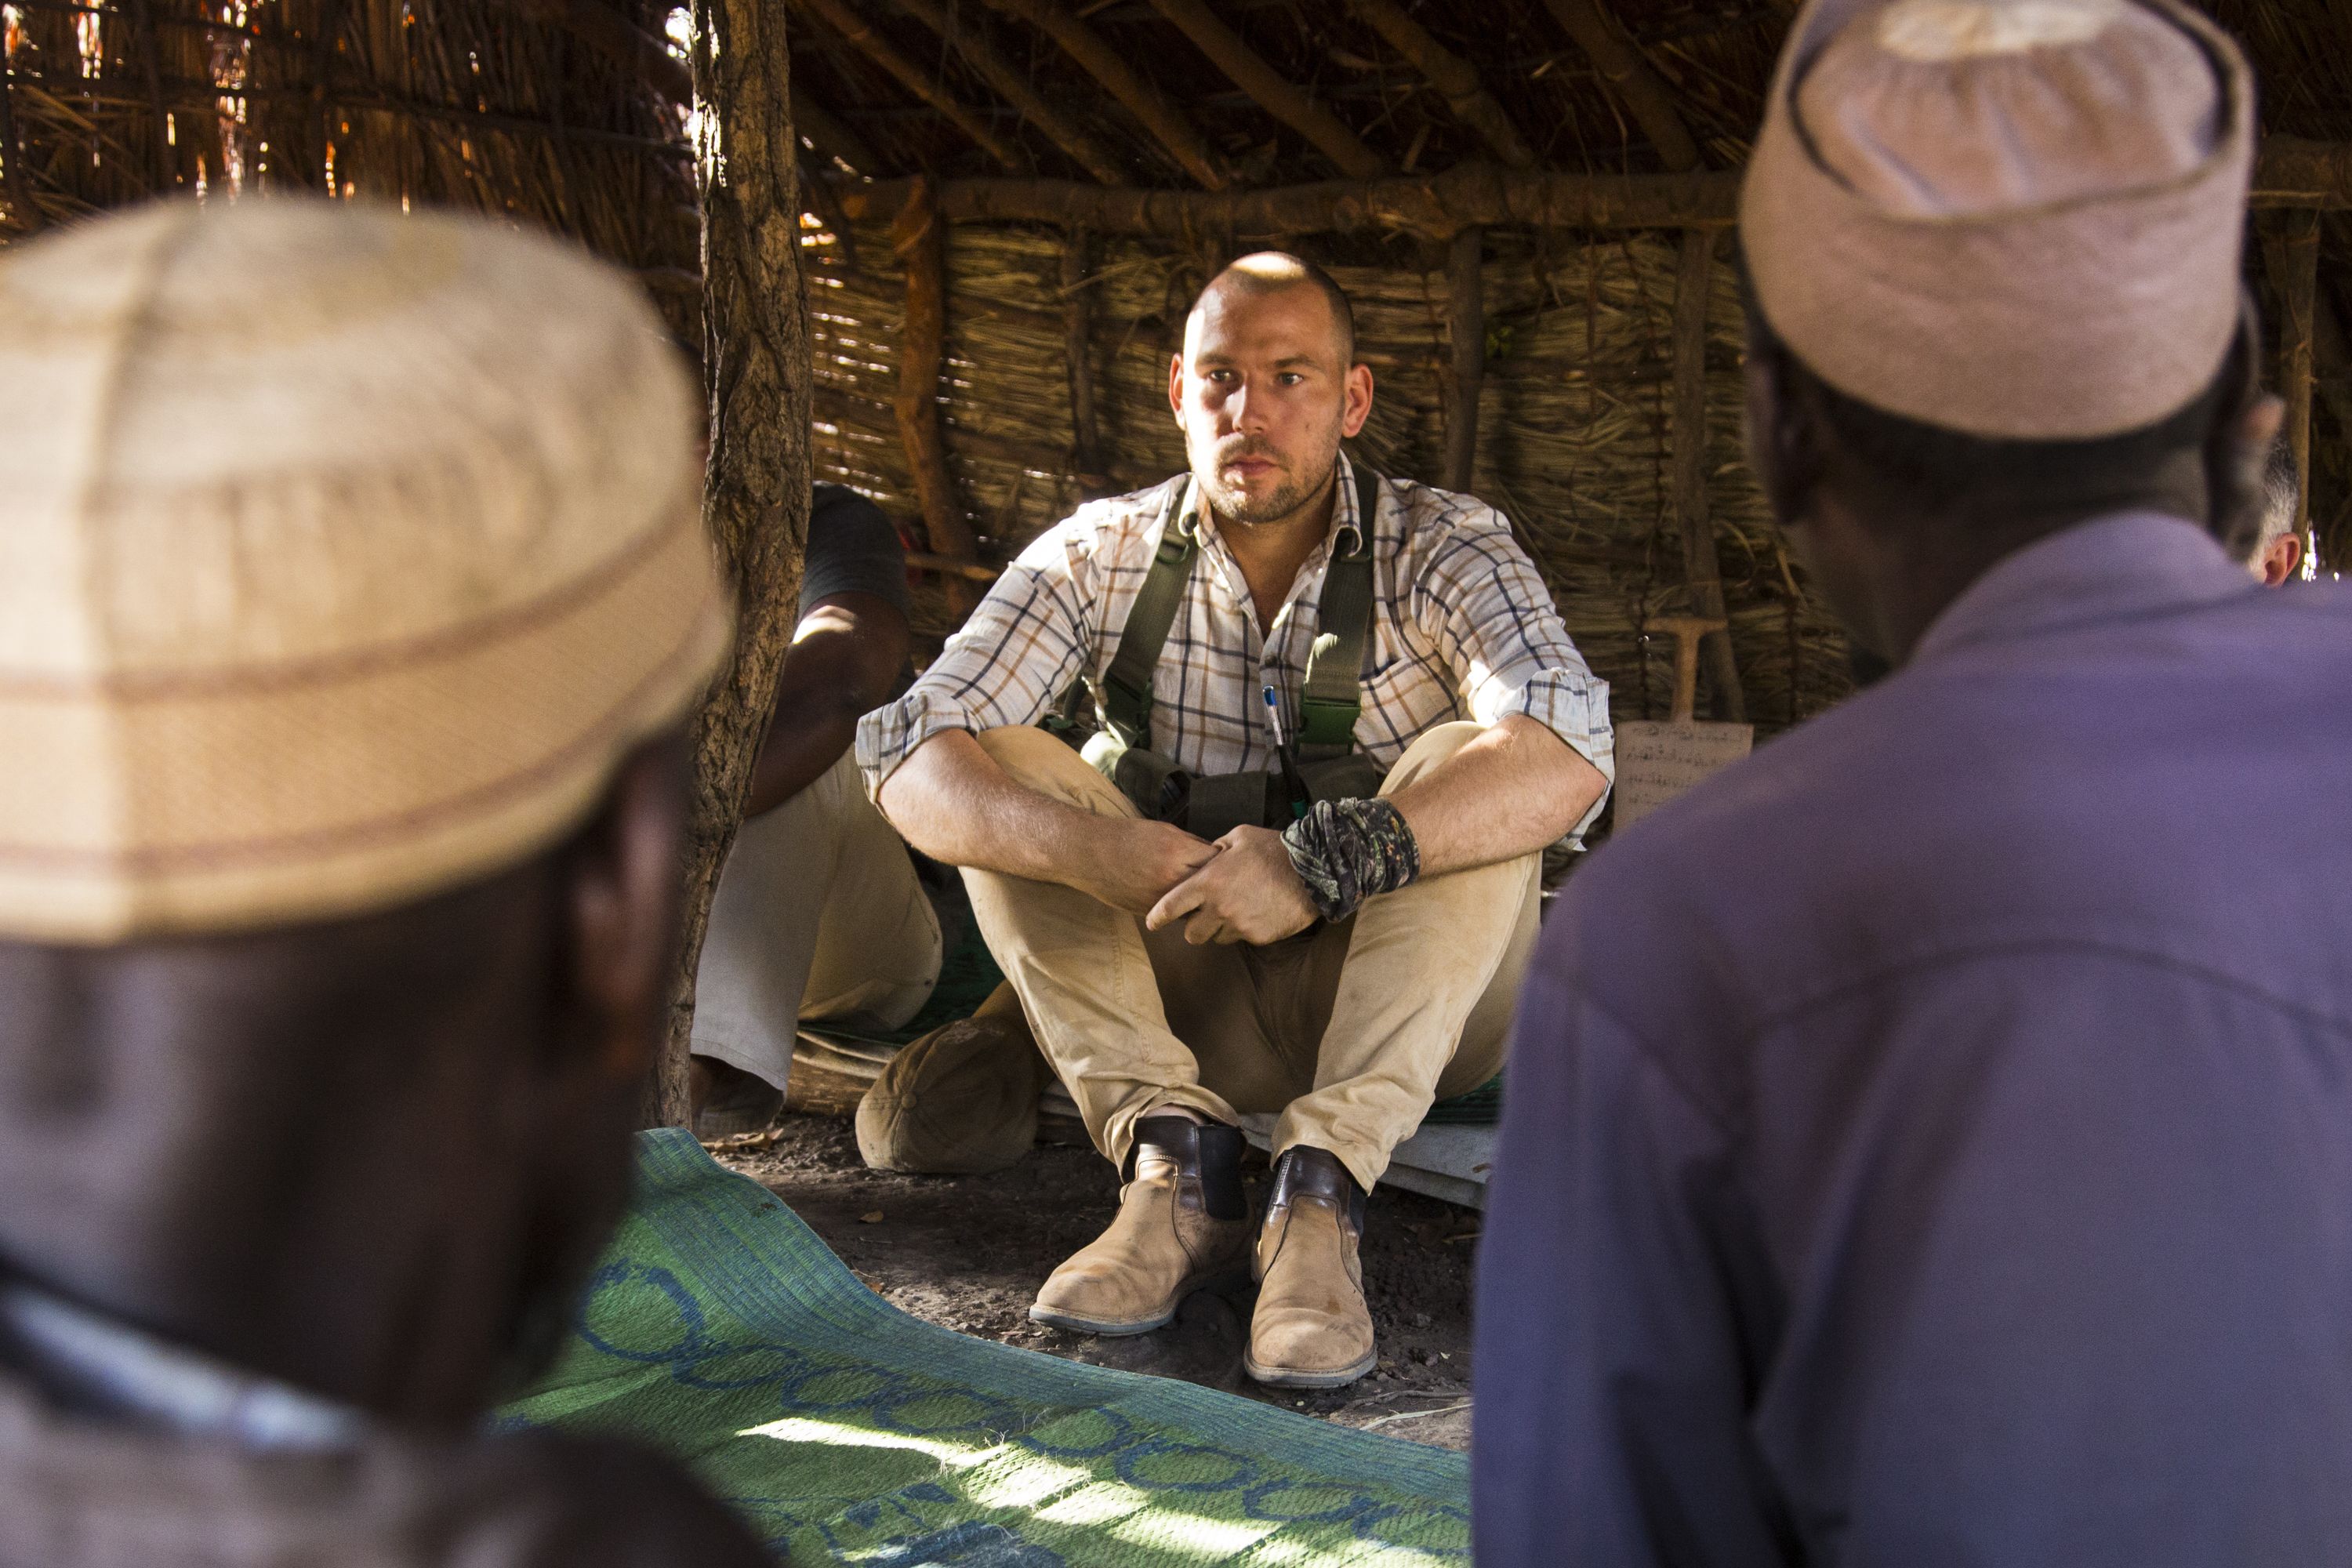 Chinko's park manager, David Simpson, speaks with elders of a community that was displaced by vicious fighting and is now sheltering inside the reserve. Image by Jack Losh. Central African Republic, 2018.